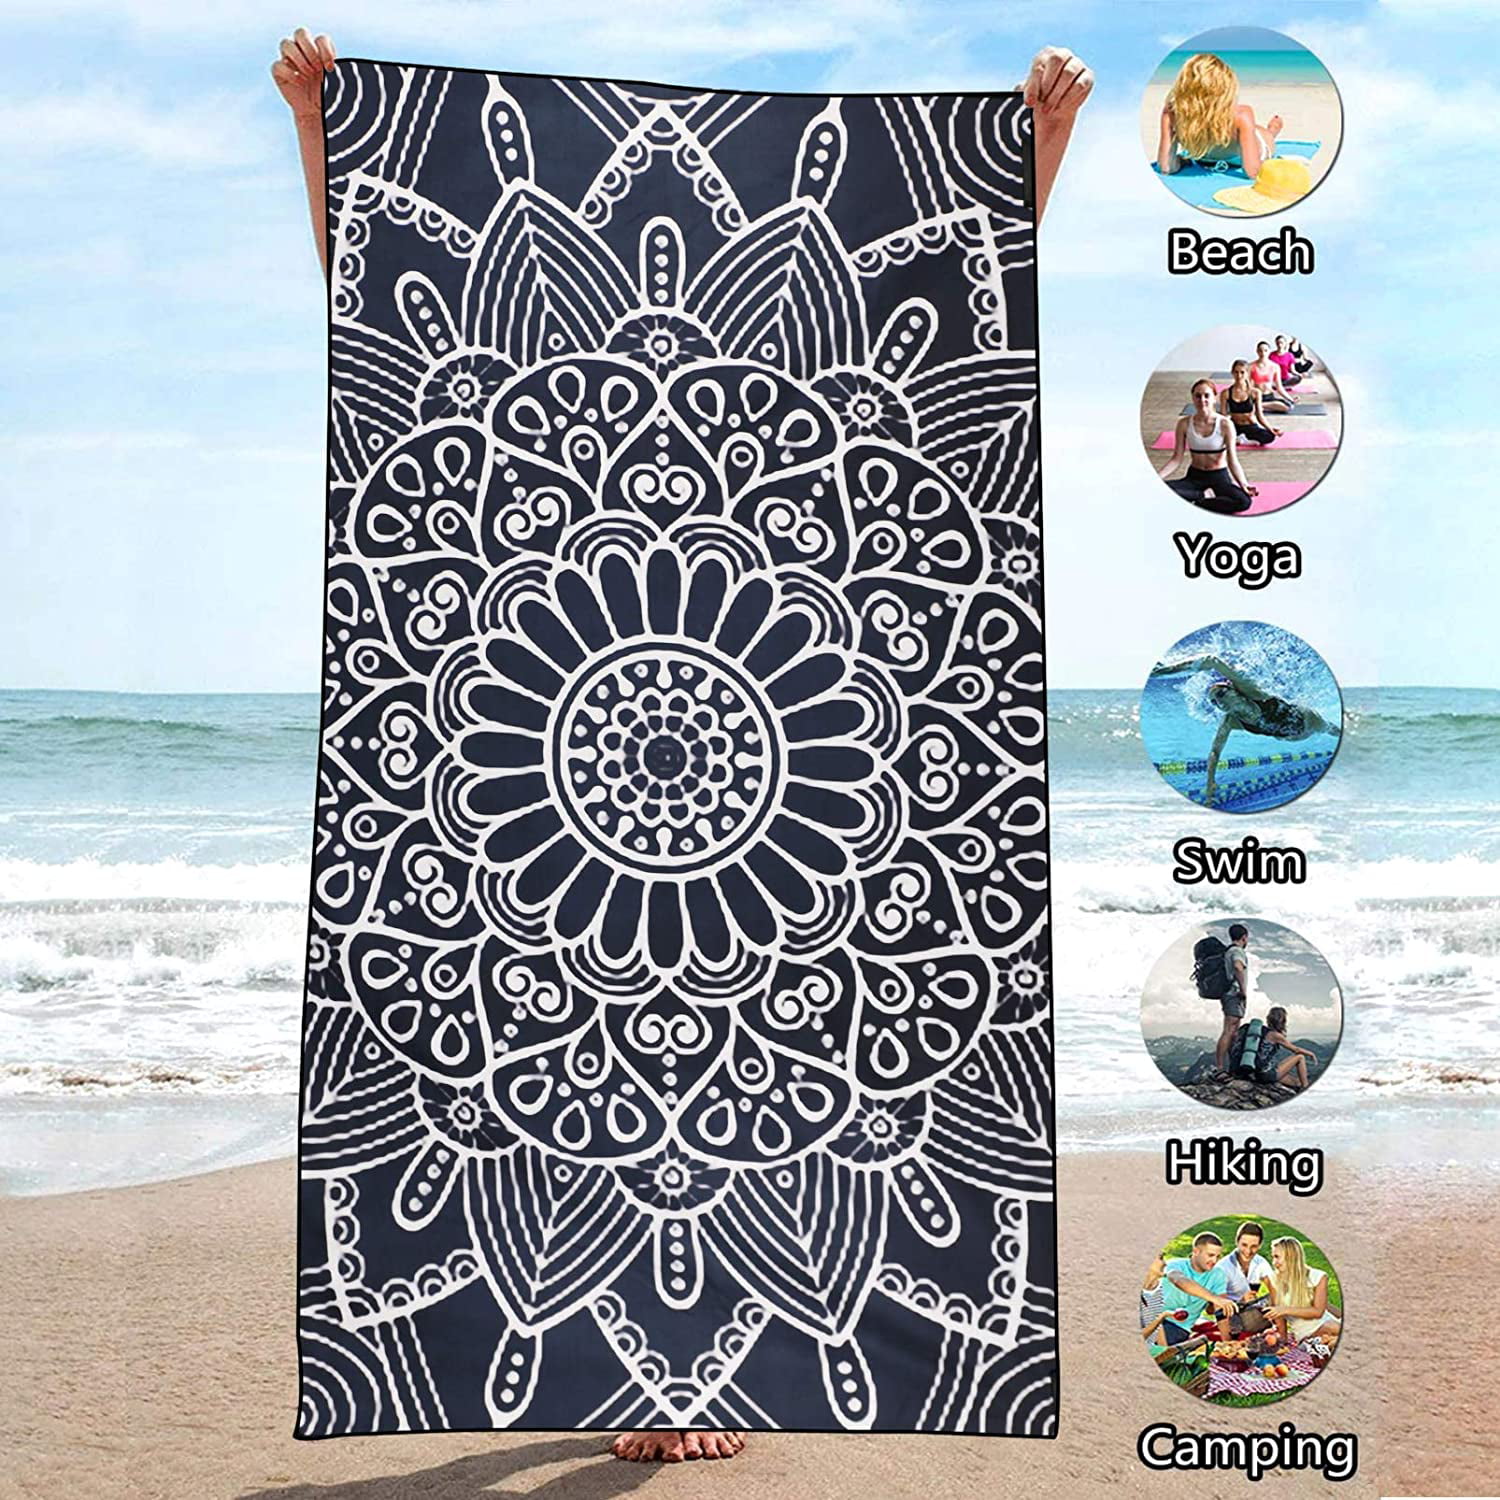 60 30 Quick Fast Dry Beach Towel Alpaca Pattern Oversized Compact Blanket for Outdoor Travel Swim Pool Camping Sand Personalized Free Lightweight Sand Proof Microfiber Beach Towels 